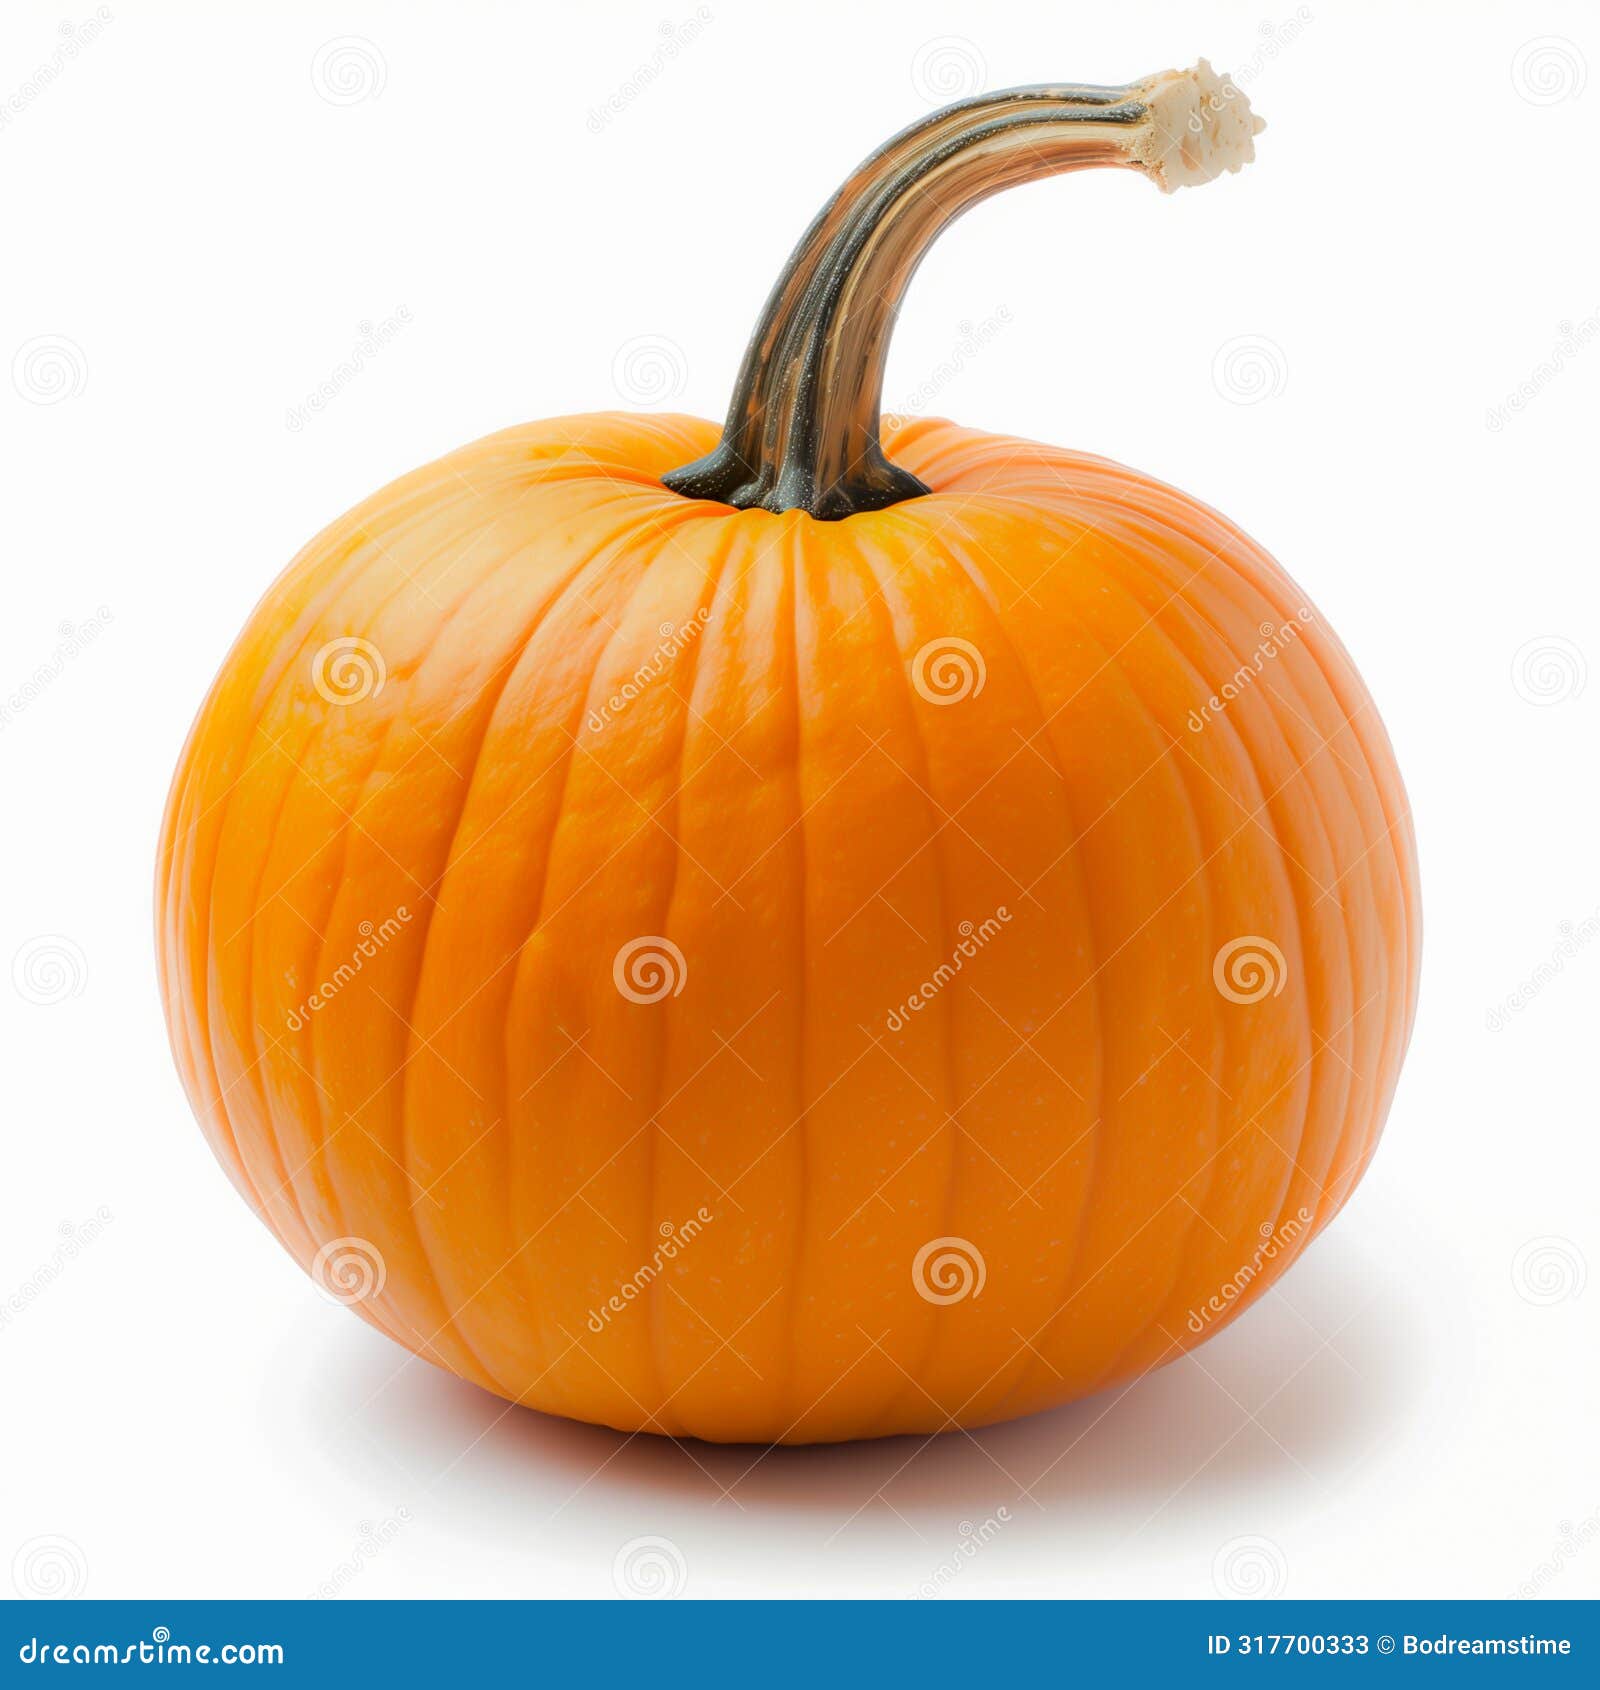 pumpkin halloween orange clean no blemishes large root clear white background